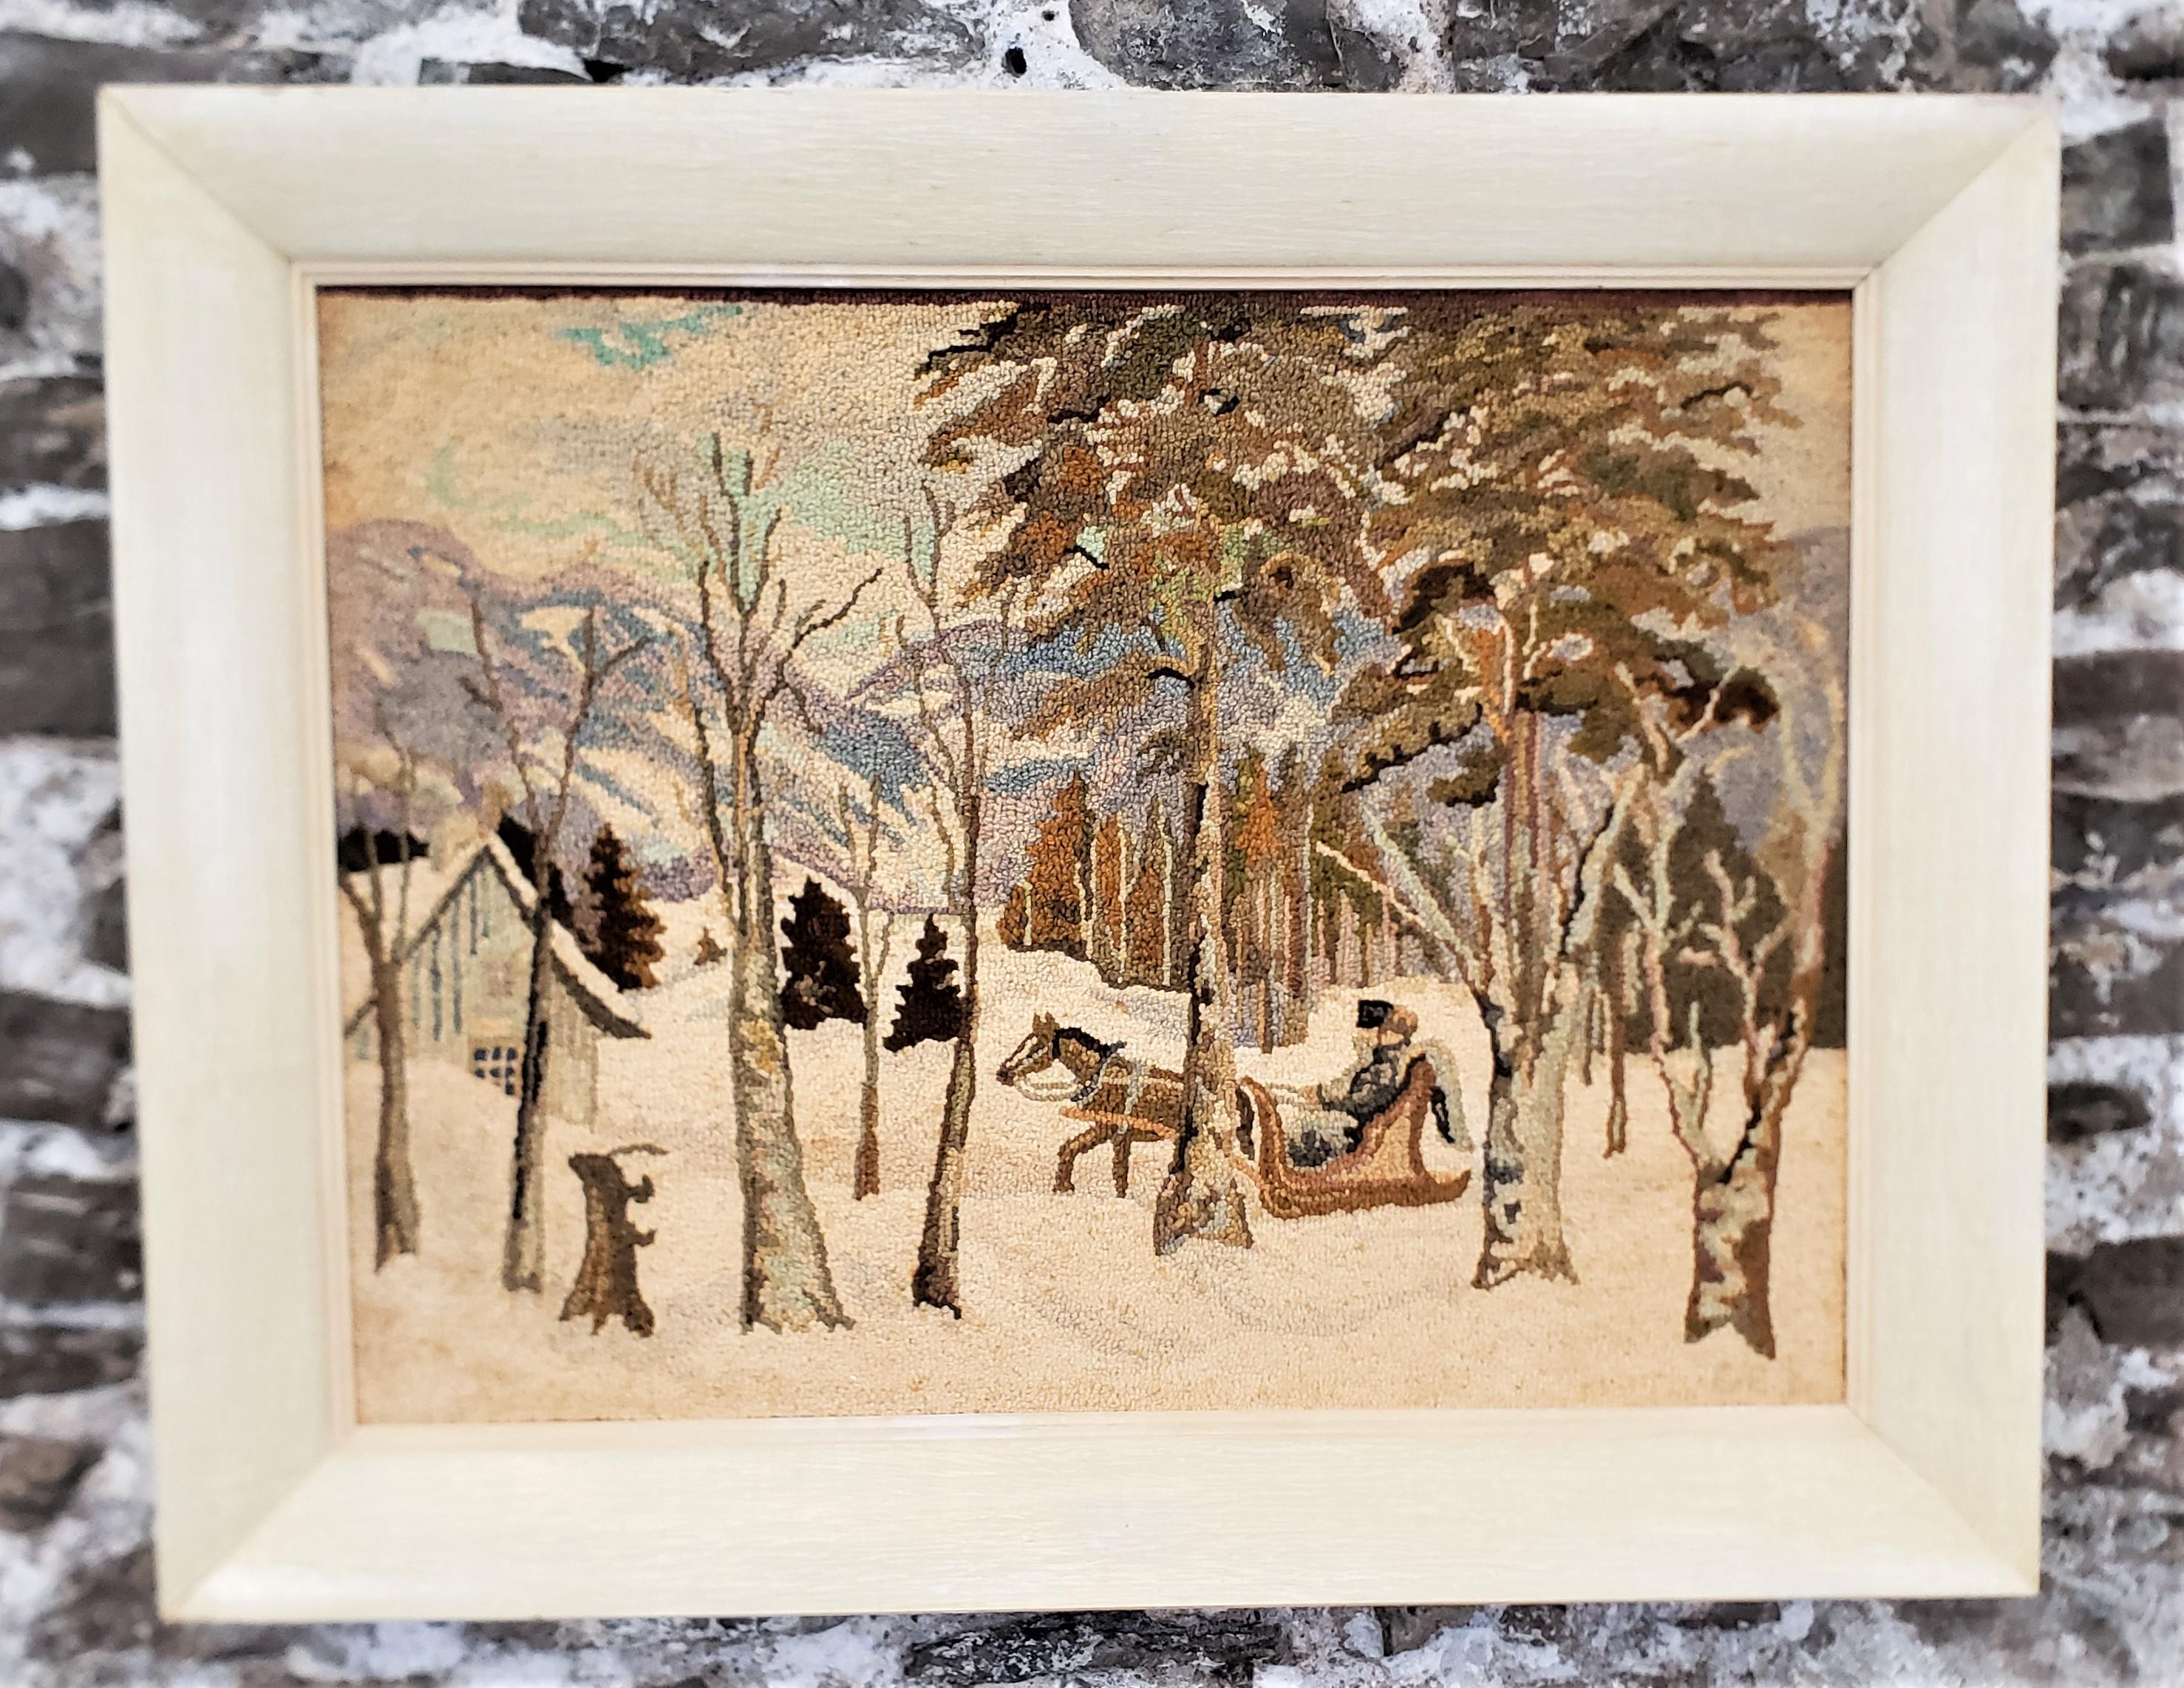 This framed hooked rug or mat was done by the well known George Edouard Tremblay of Quebec Canada in approximately 1940 in his period Folk Art style. The rug or mat is done with wool on burlap which has been mounted on masonite board and framed in a